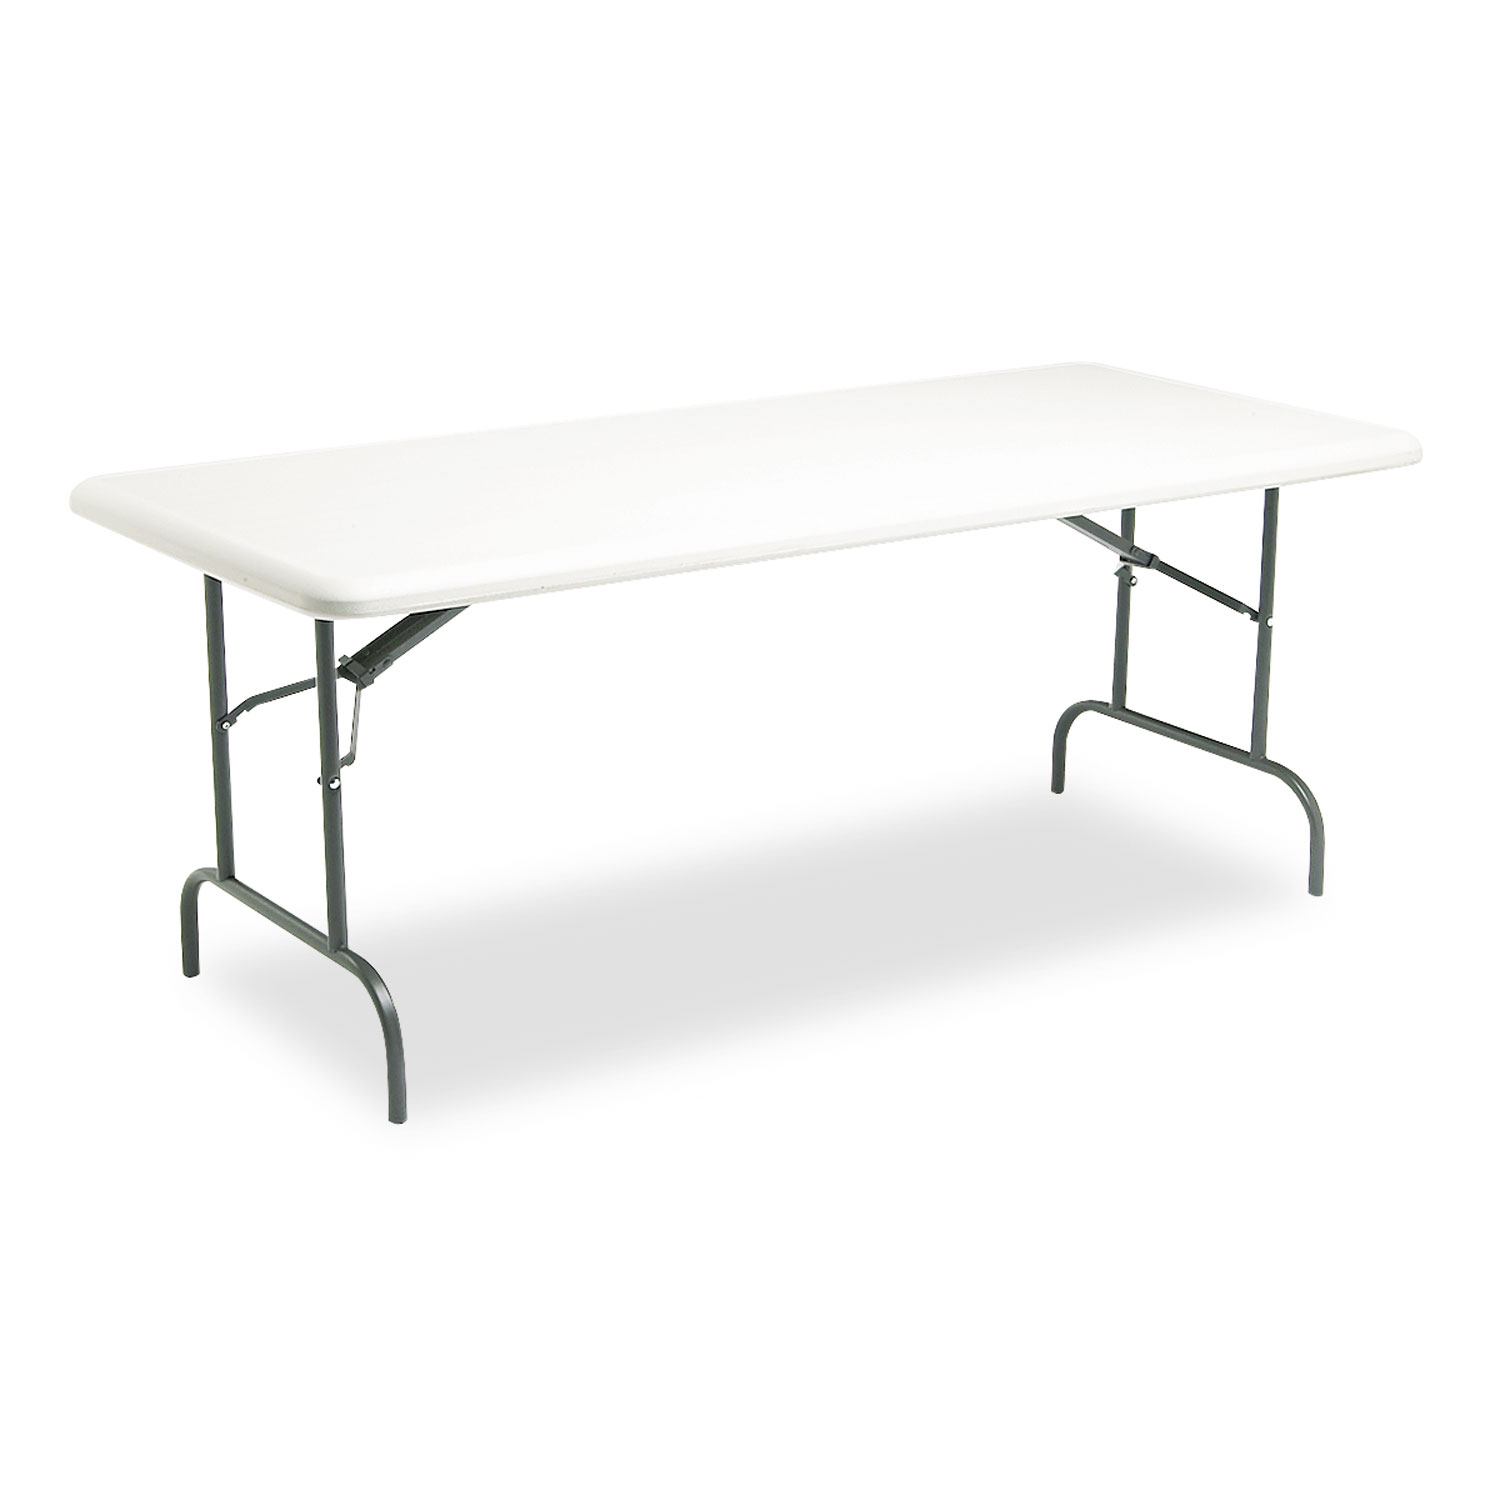 Iceberg ICE65223 IndestrucTables Too 1200 Series Resin Folding Table, 72w x 30d x 29h, Platinum